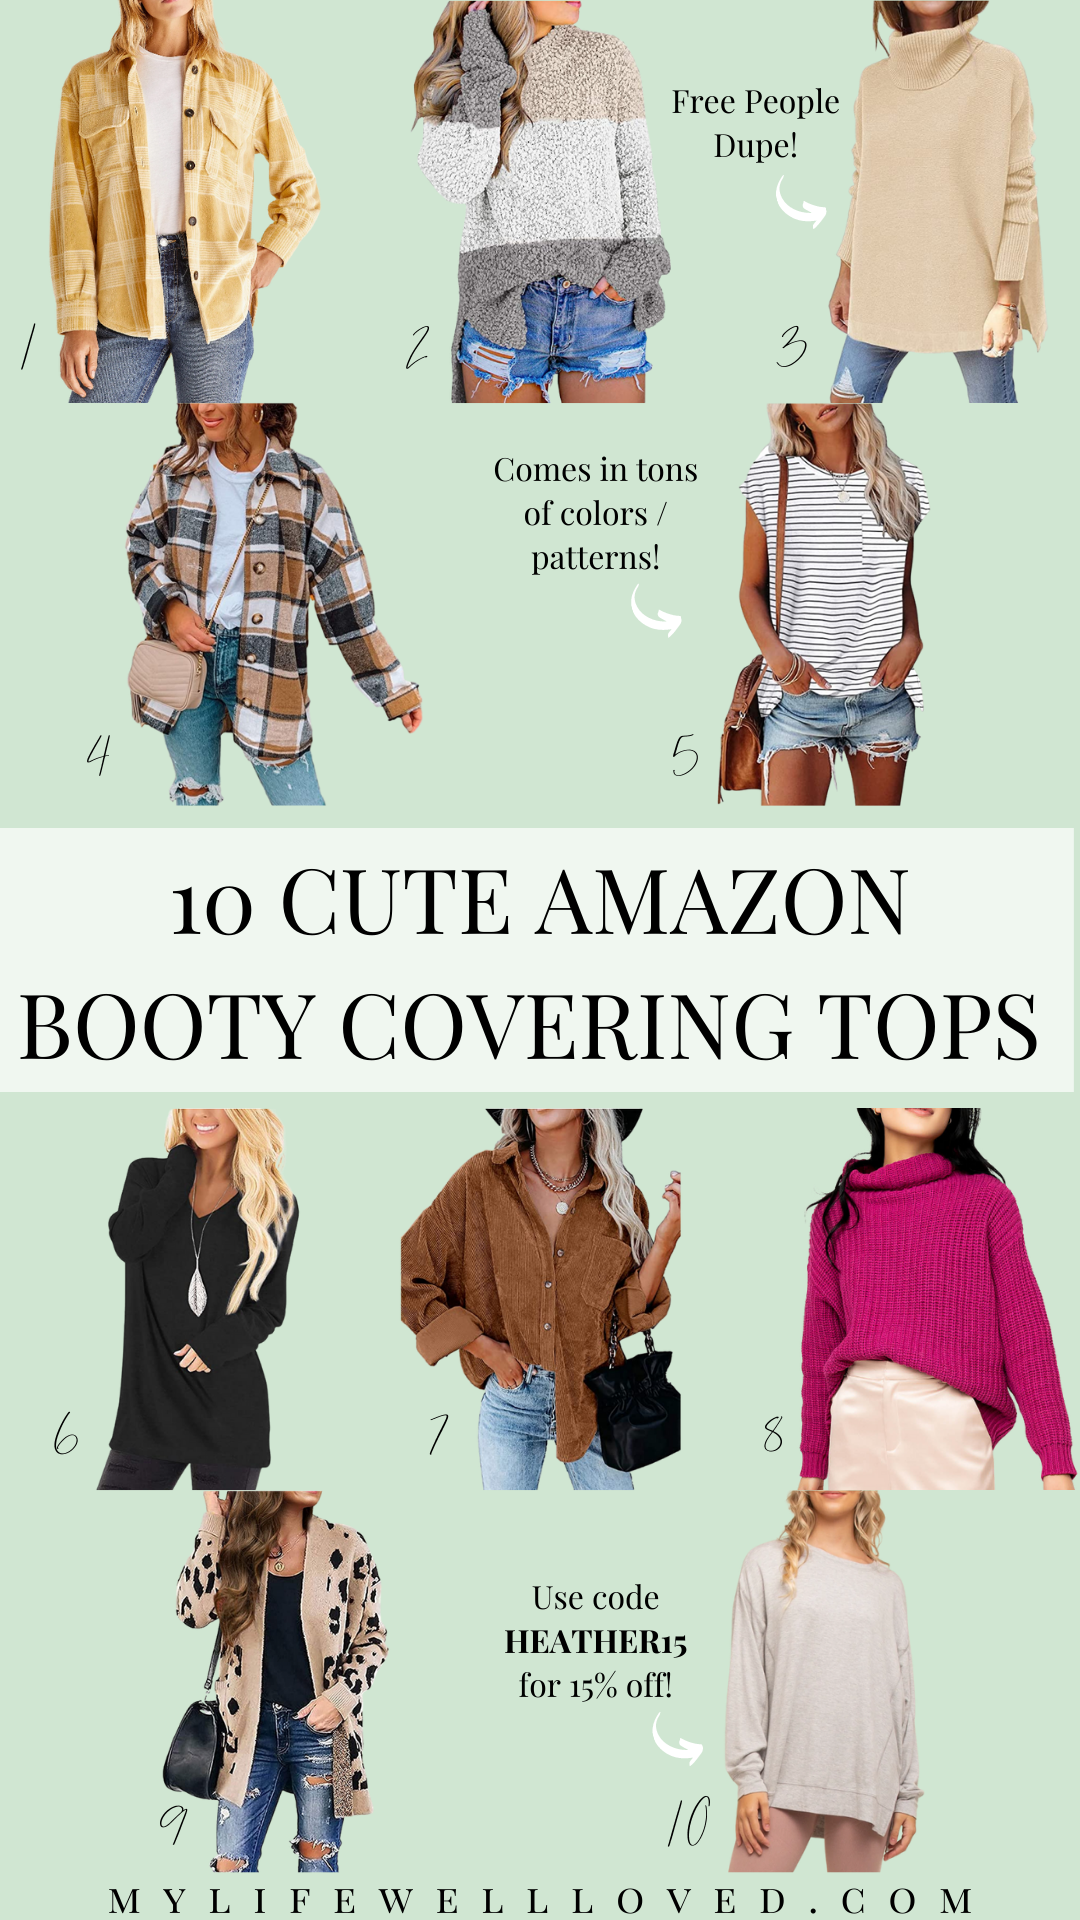 How To Style Spanx Faux Leather Leggings: 10 Cute Outfit Ideas From Amazon by Alabama mommy + fashion blogger, Heather Brown // My Life Well Loved